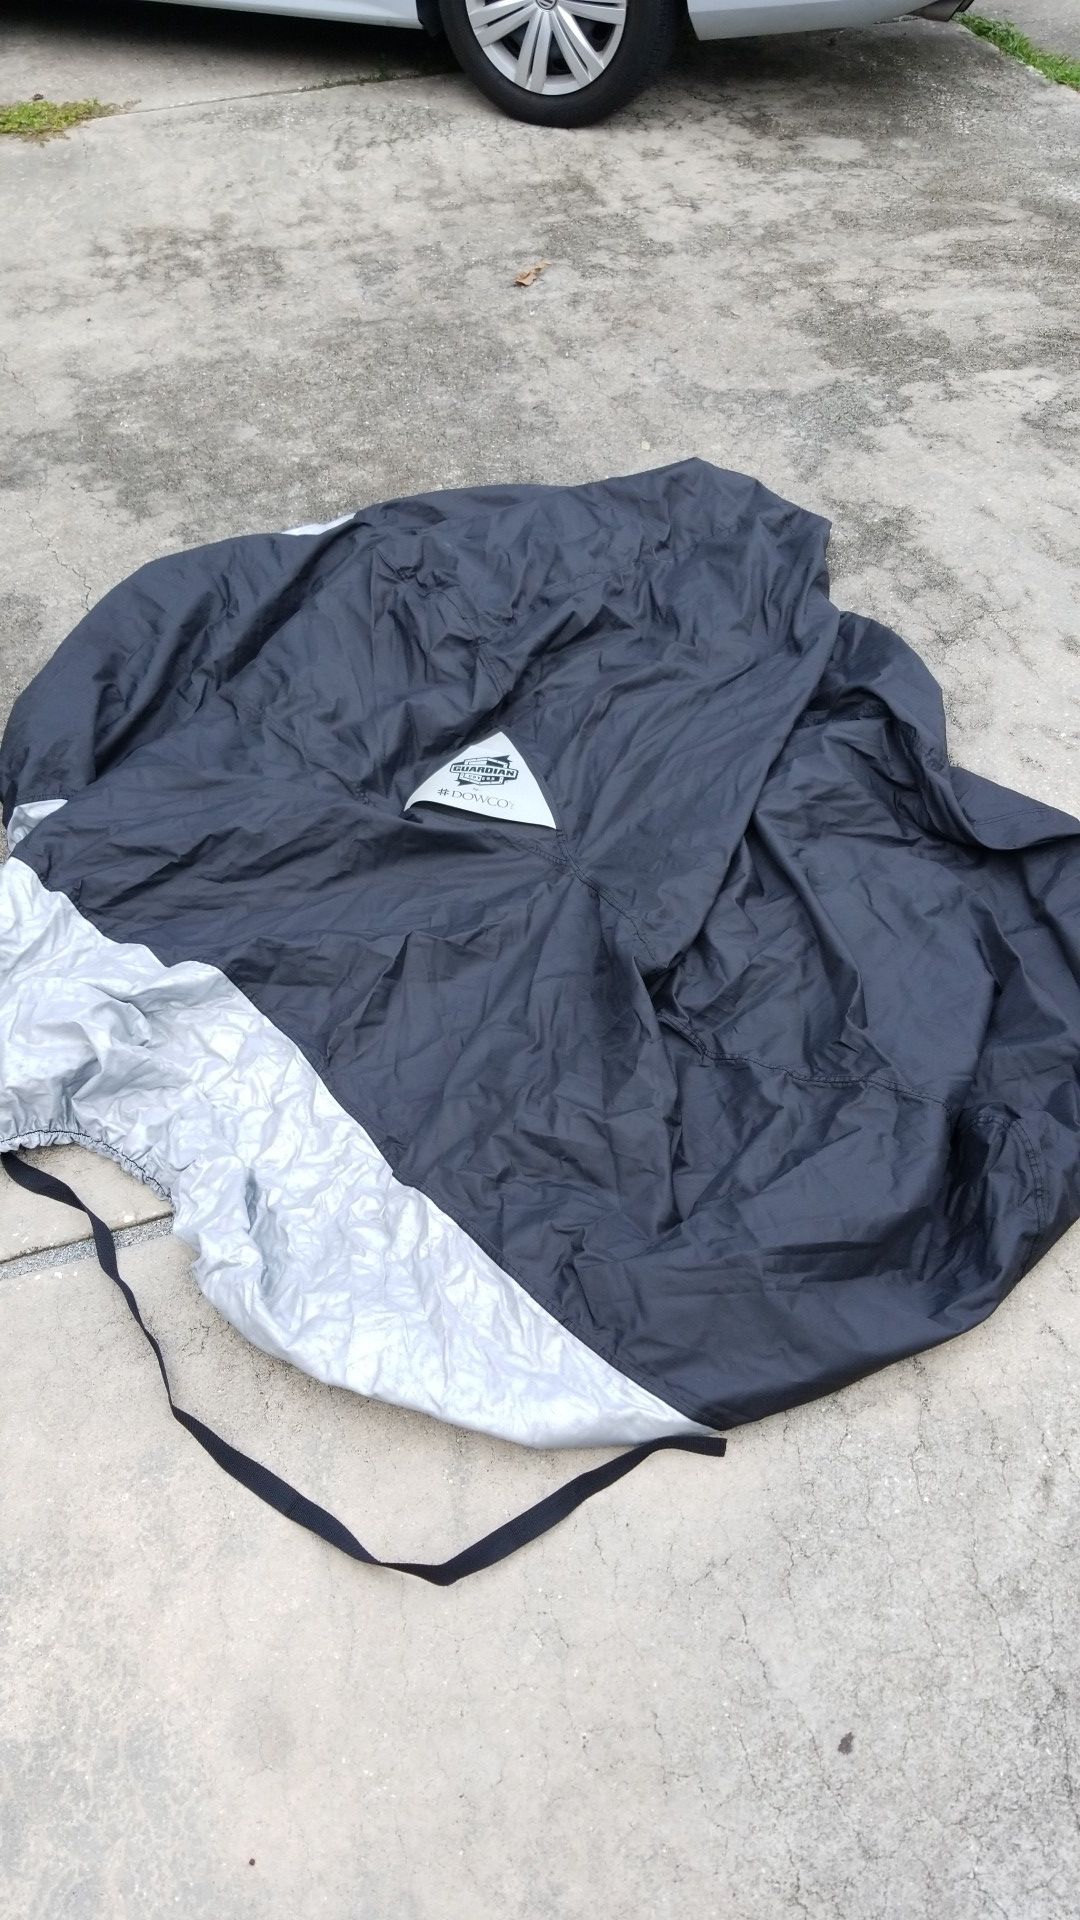 Dowco XL motorcycle cover